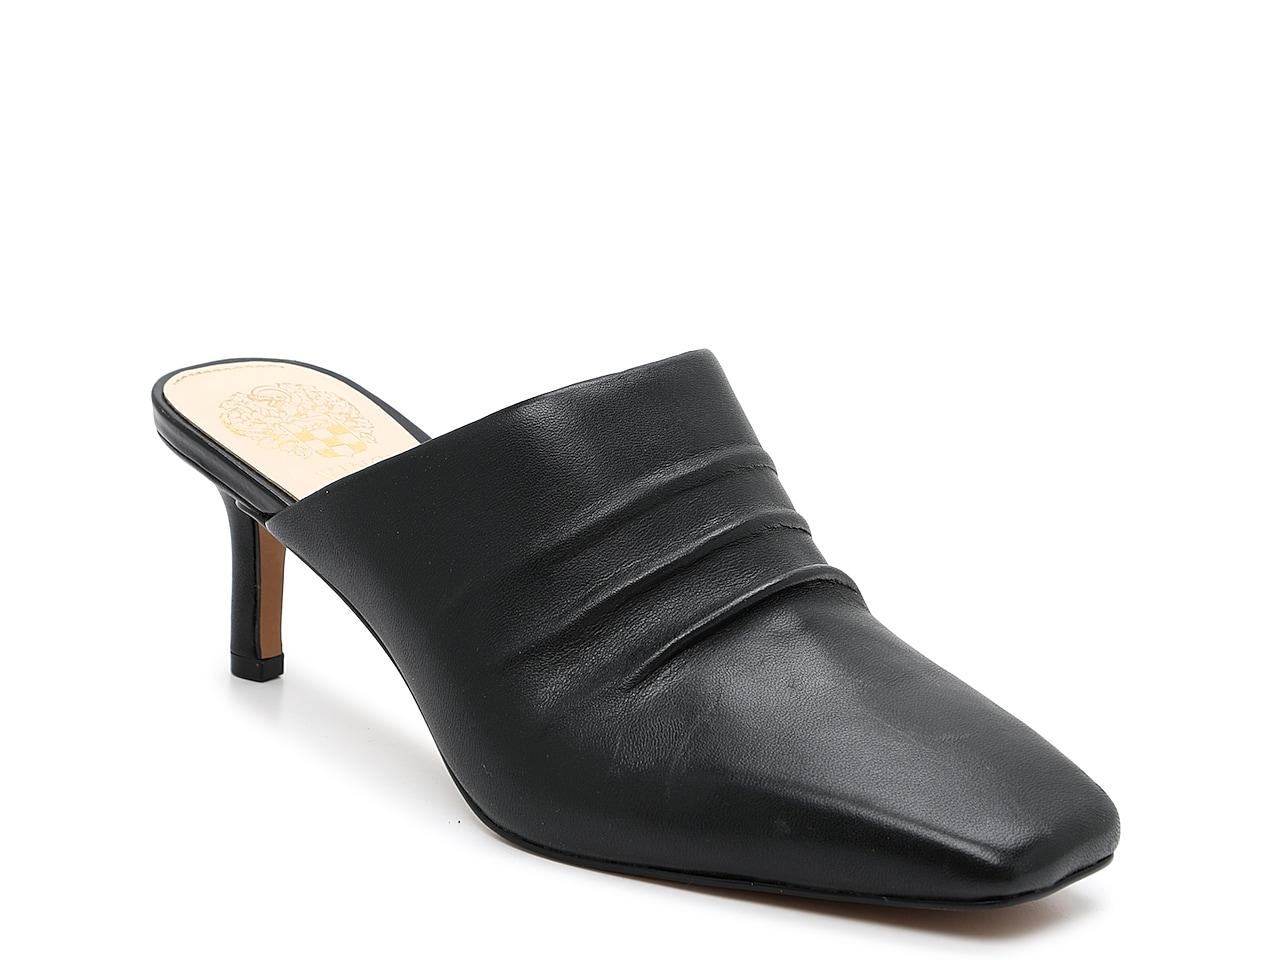 Vince Camuto Leather Ovina Mule in Black Leather (Black) | Lyst